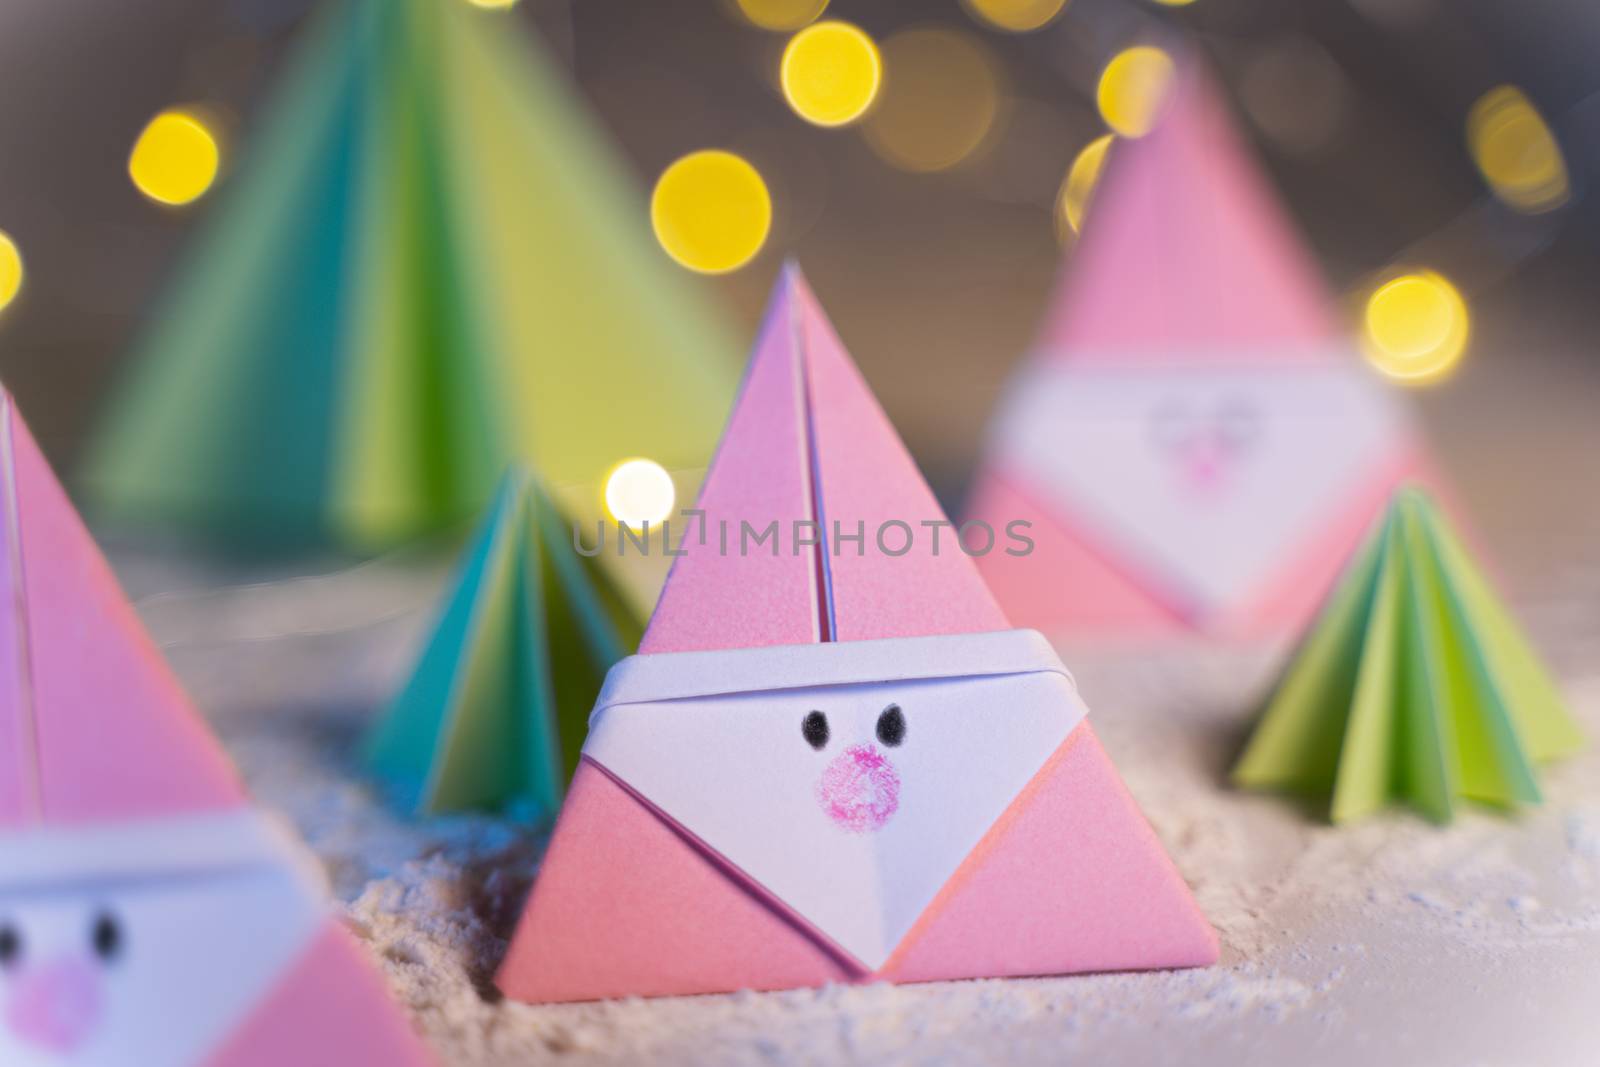 Origami Xmas scene with a pink Santa claus and crhistmas trees in paper craft